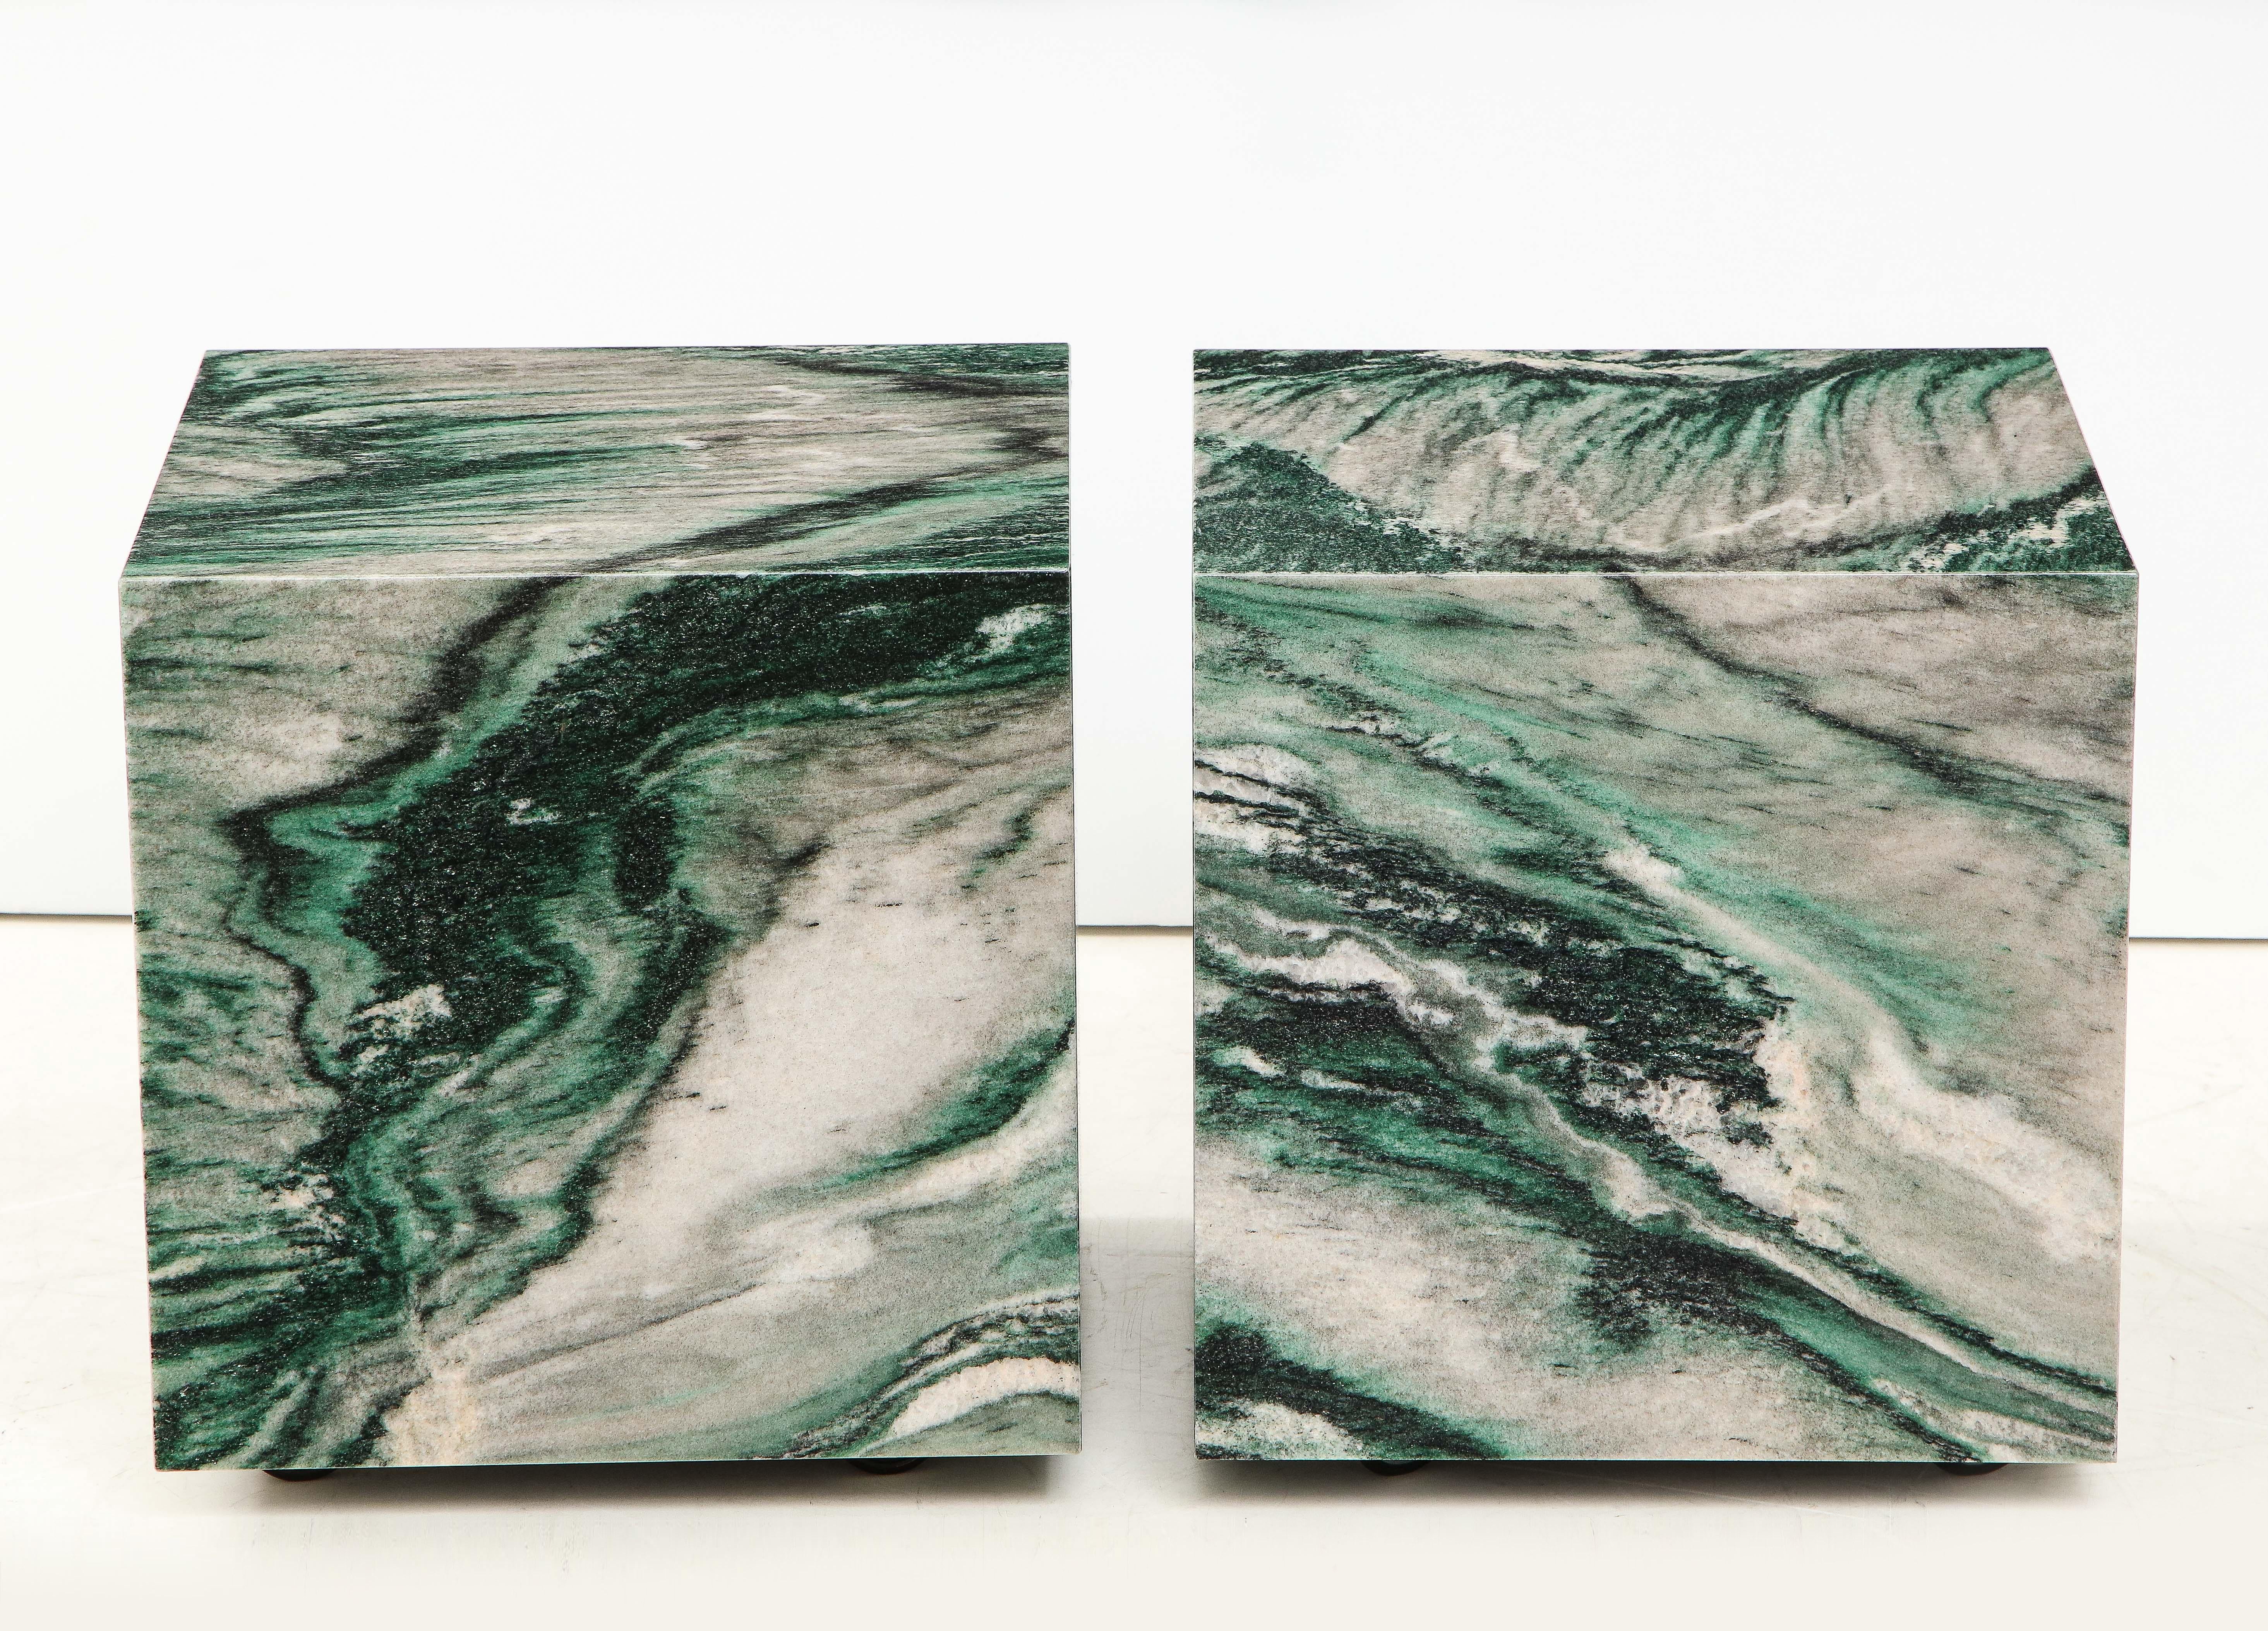 Stunning pair of Polar Verde marble cubes.
The matched marble makes for a beautiful pair of end tables that are easily
moveable as they are on polished chrome casters.